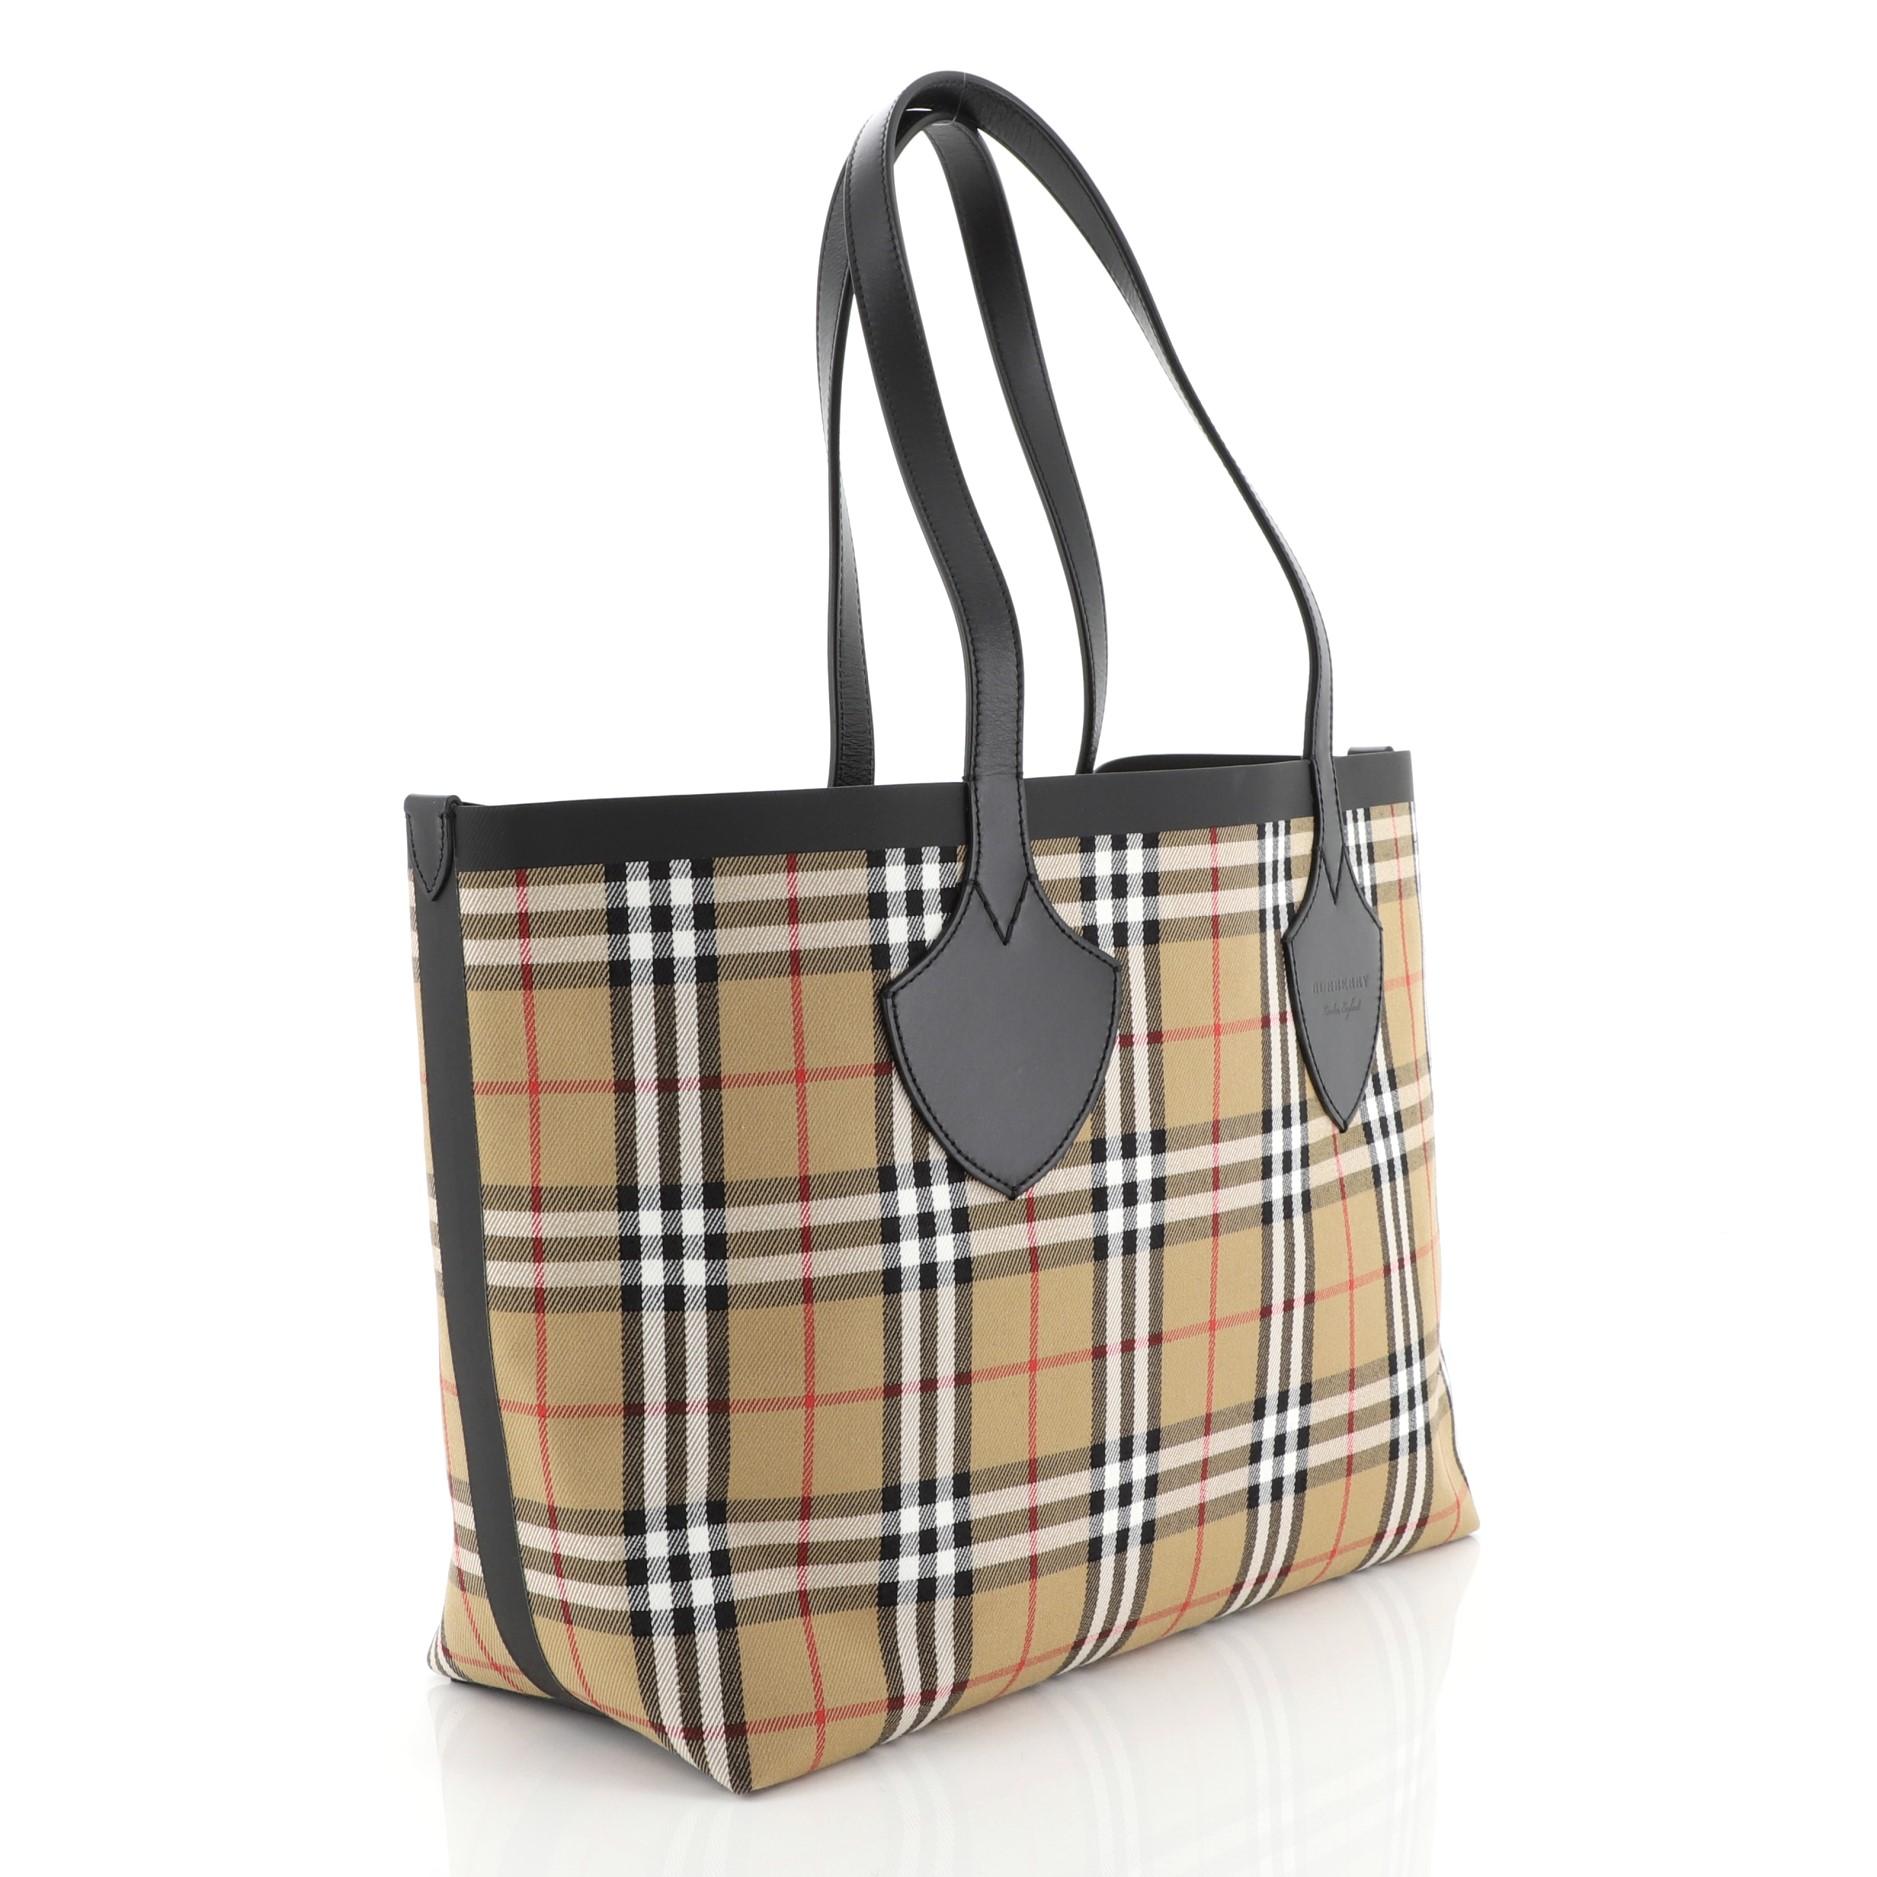 This Burberry Reversible Giant Tote Vintage Check Canvas Medium, crafted from neutral check canvas, features dual leather handles and trim. It opens to a reversible printed canvas. 

Estimated Retail Price: $1,150
Condition: Very good. Stains on